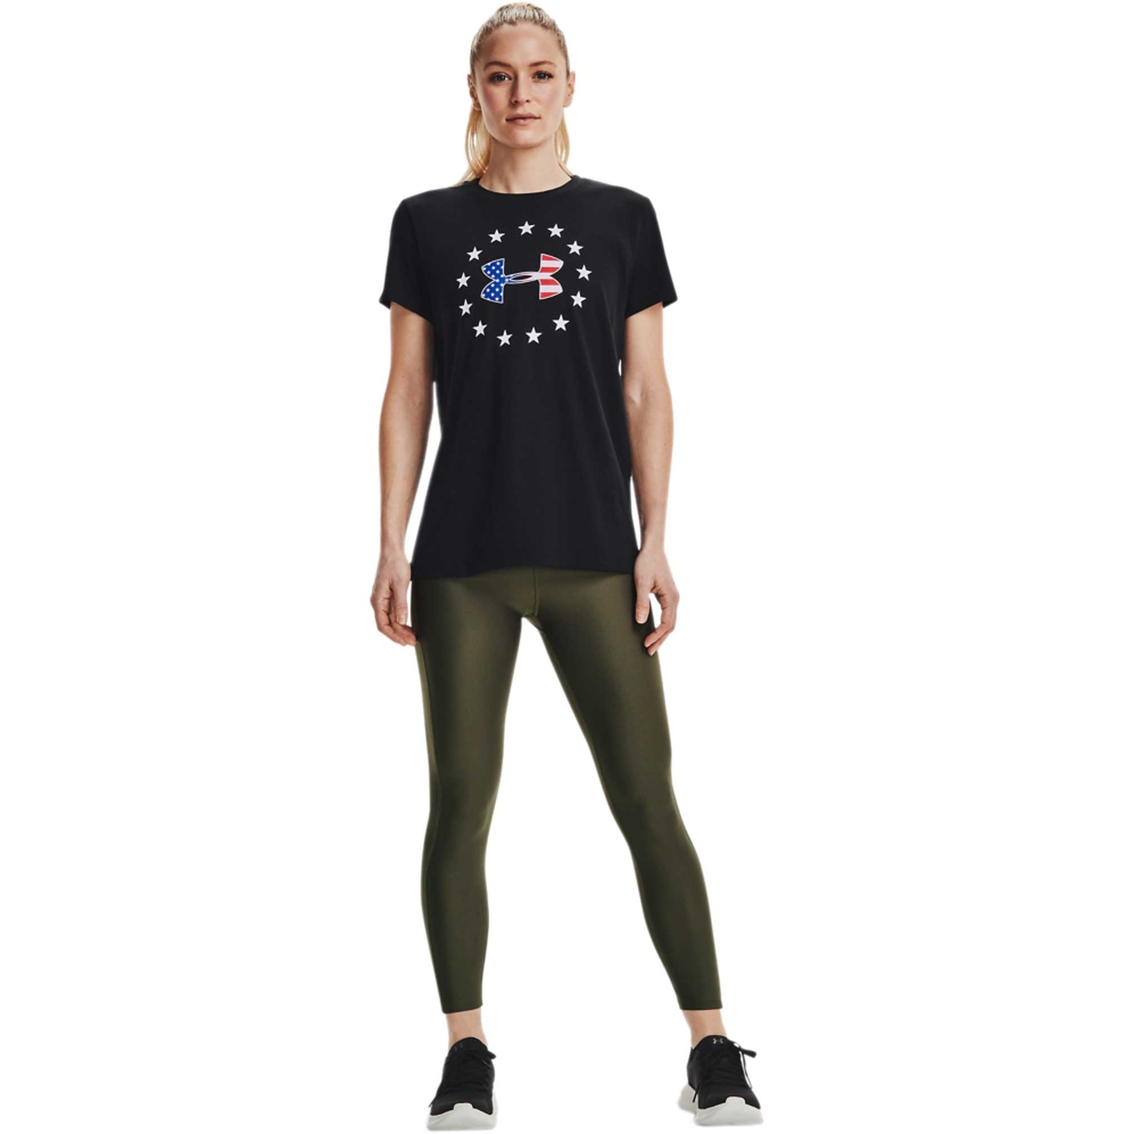 Under Armour Freedom Flag T Shirt - Image 3 of 6